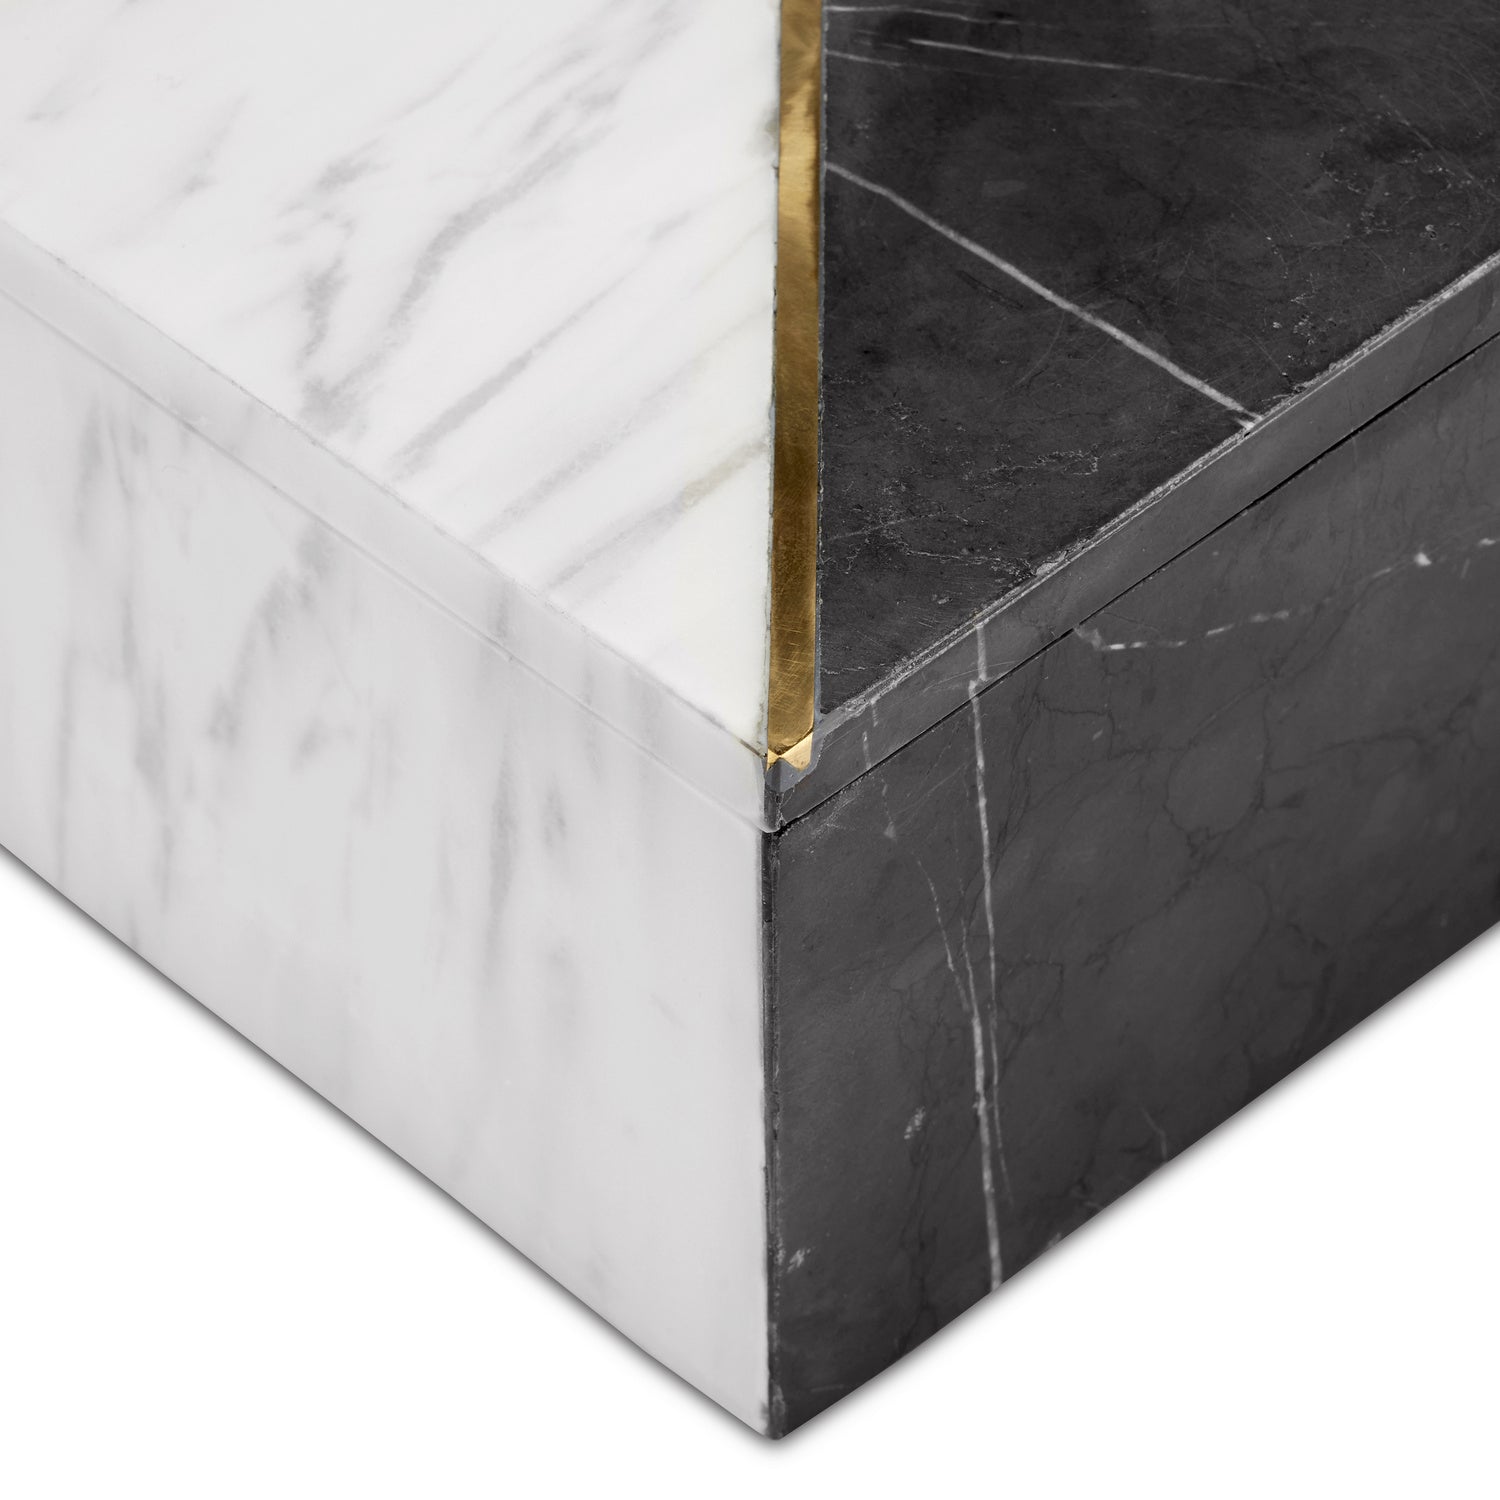 Box from the Deena collection in White/Black/Brass finish